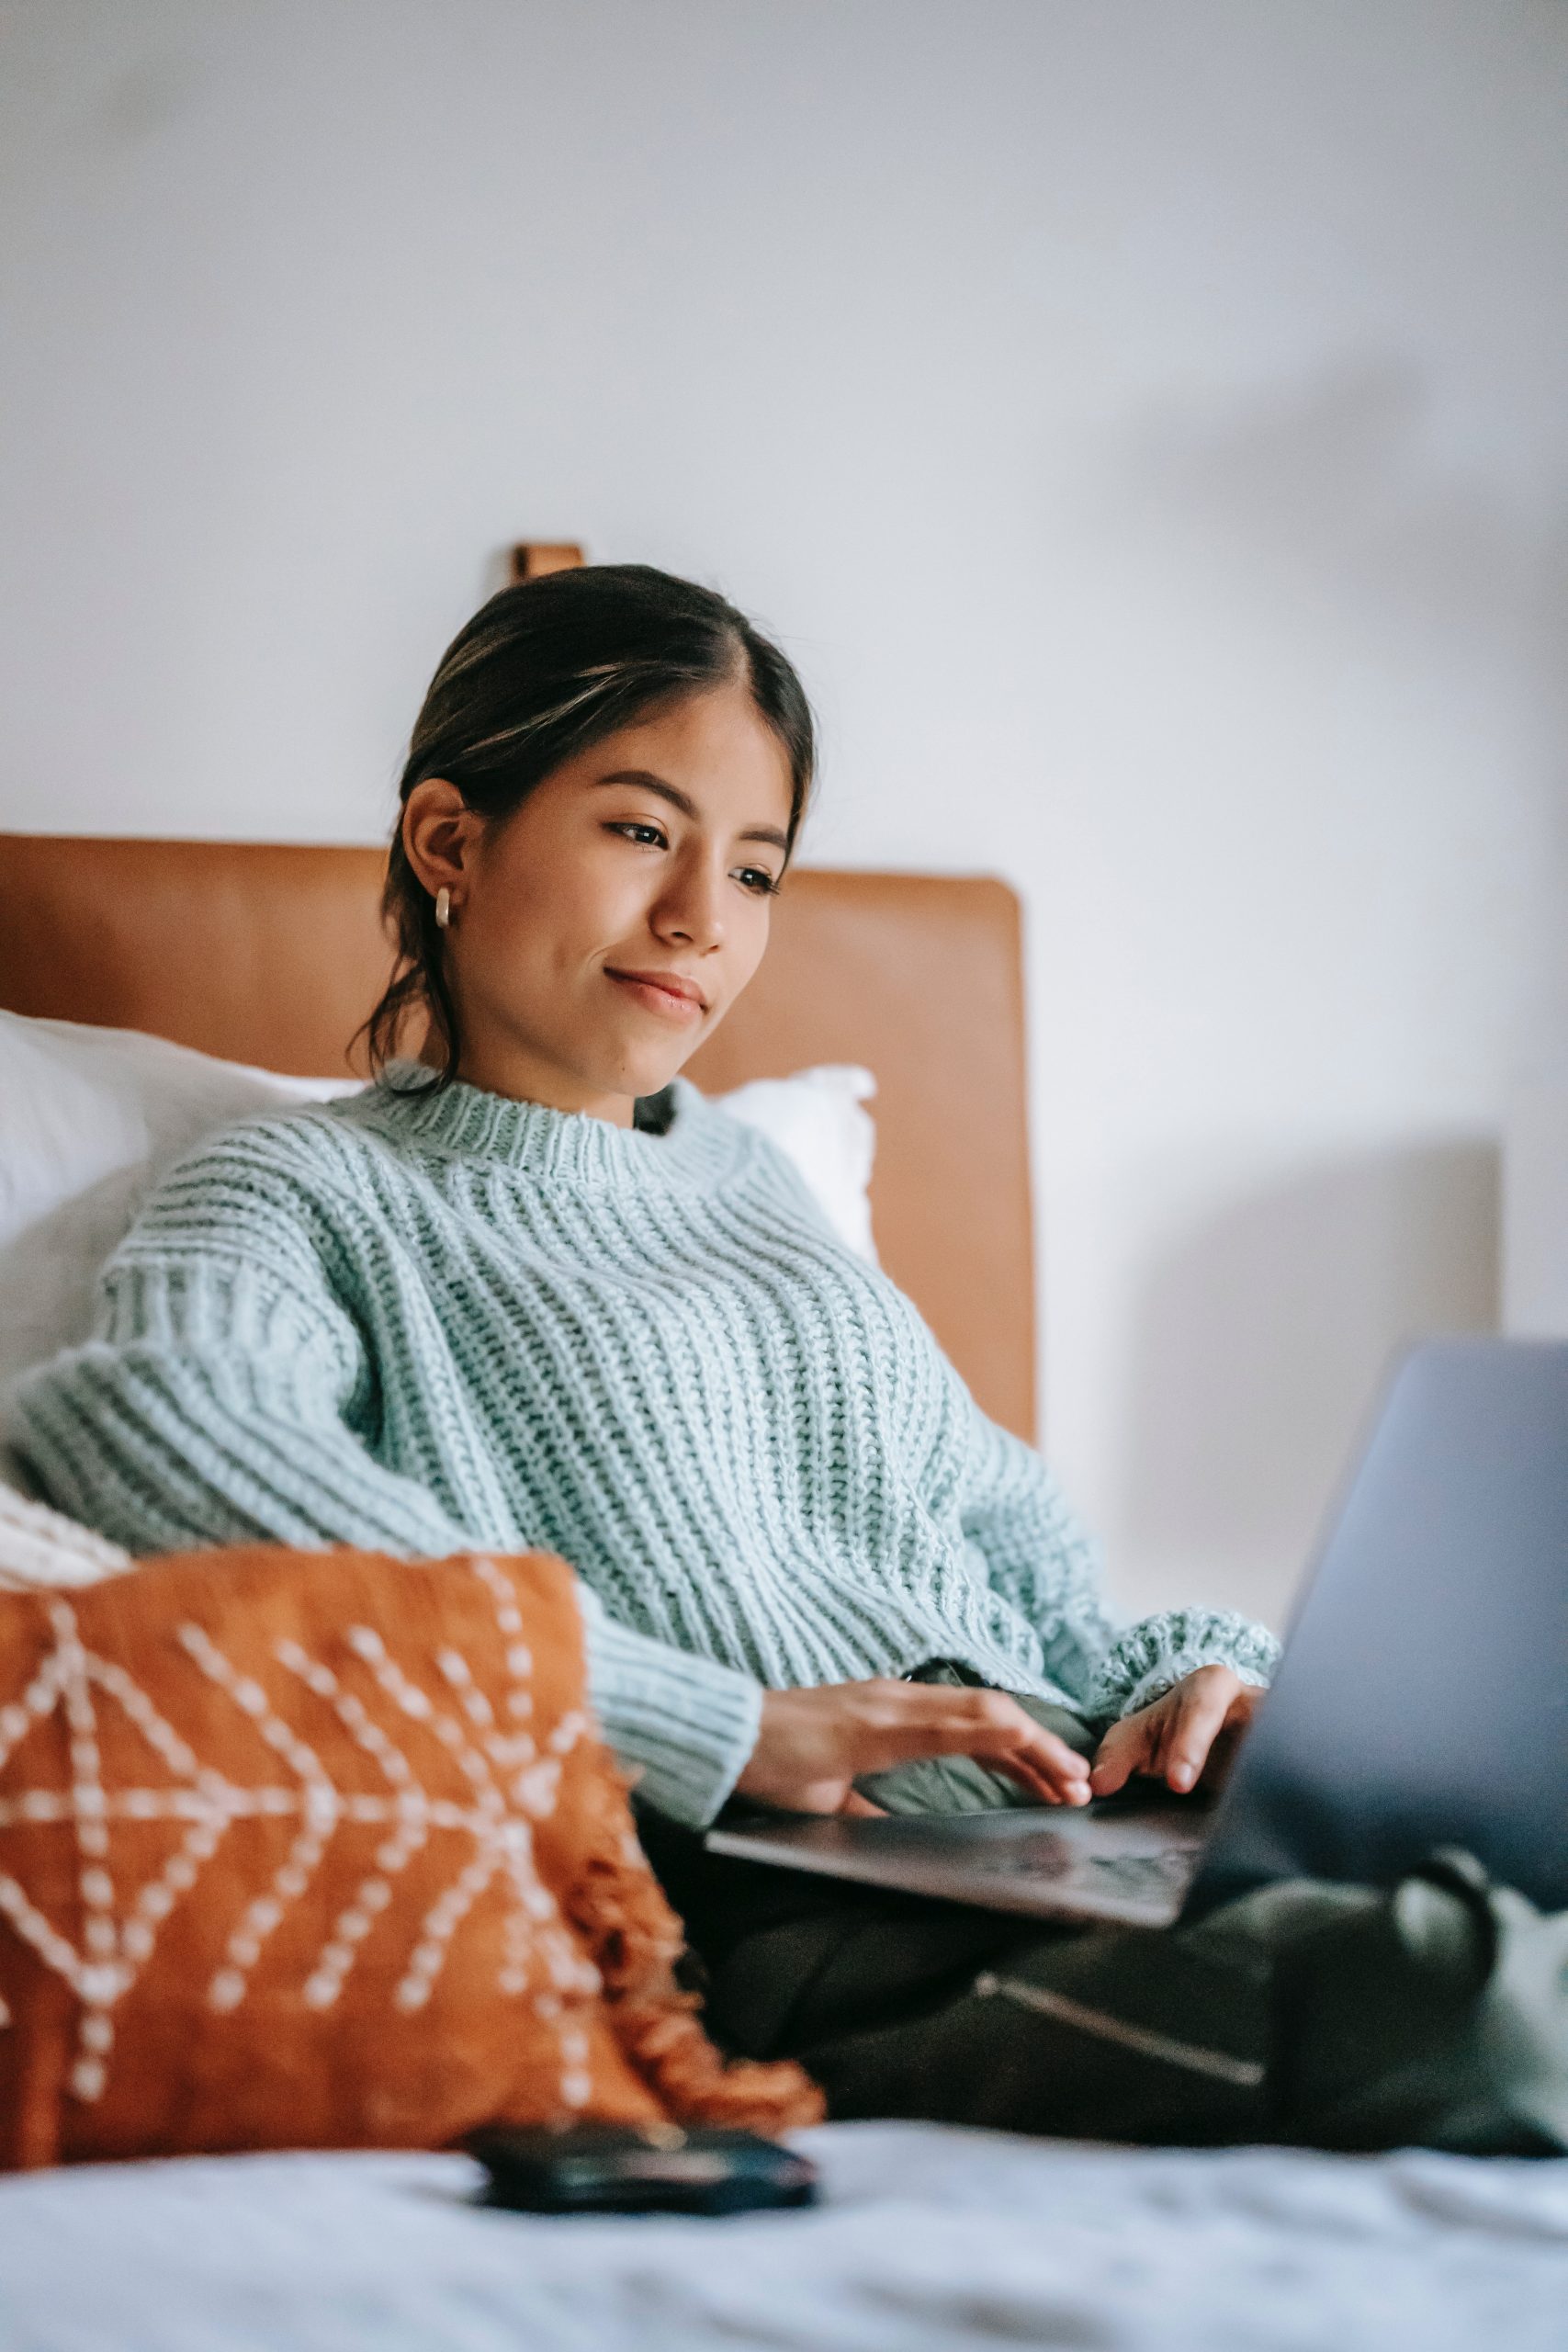 Millennial Latinx woman attends an online therapy session while sitting on her bed. She is holding a laptop on her lap and has an engaged, interested expression on her face.